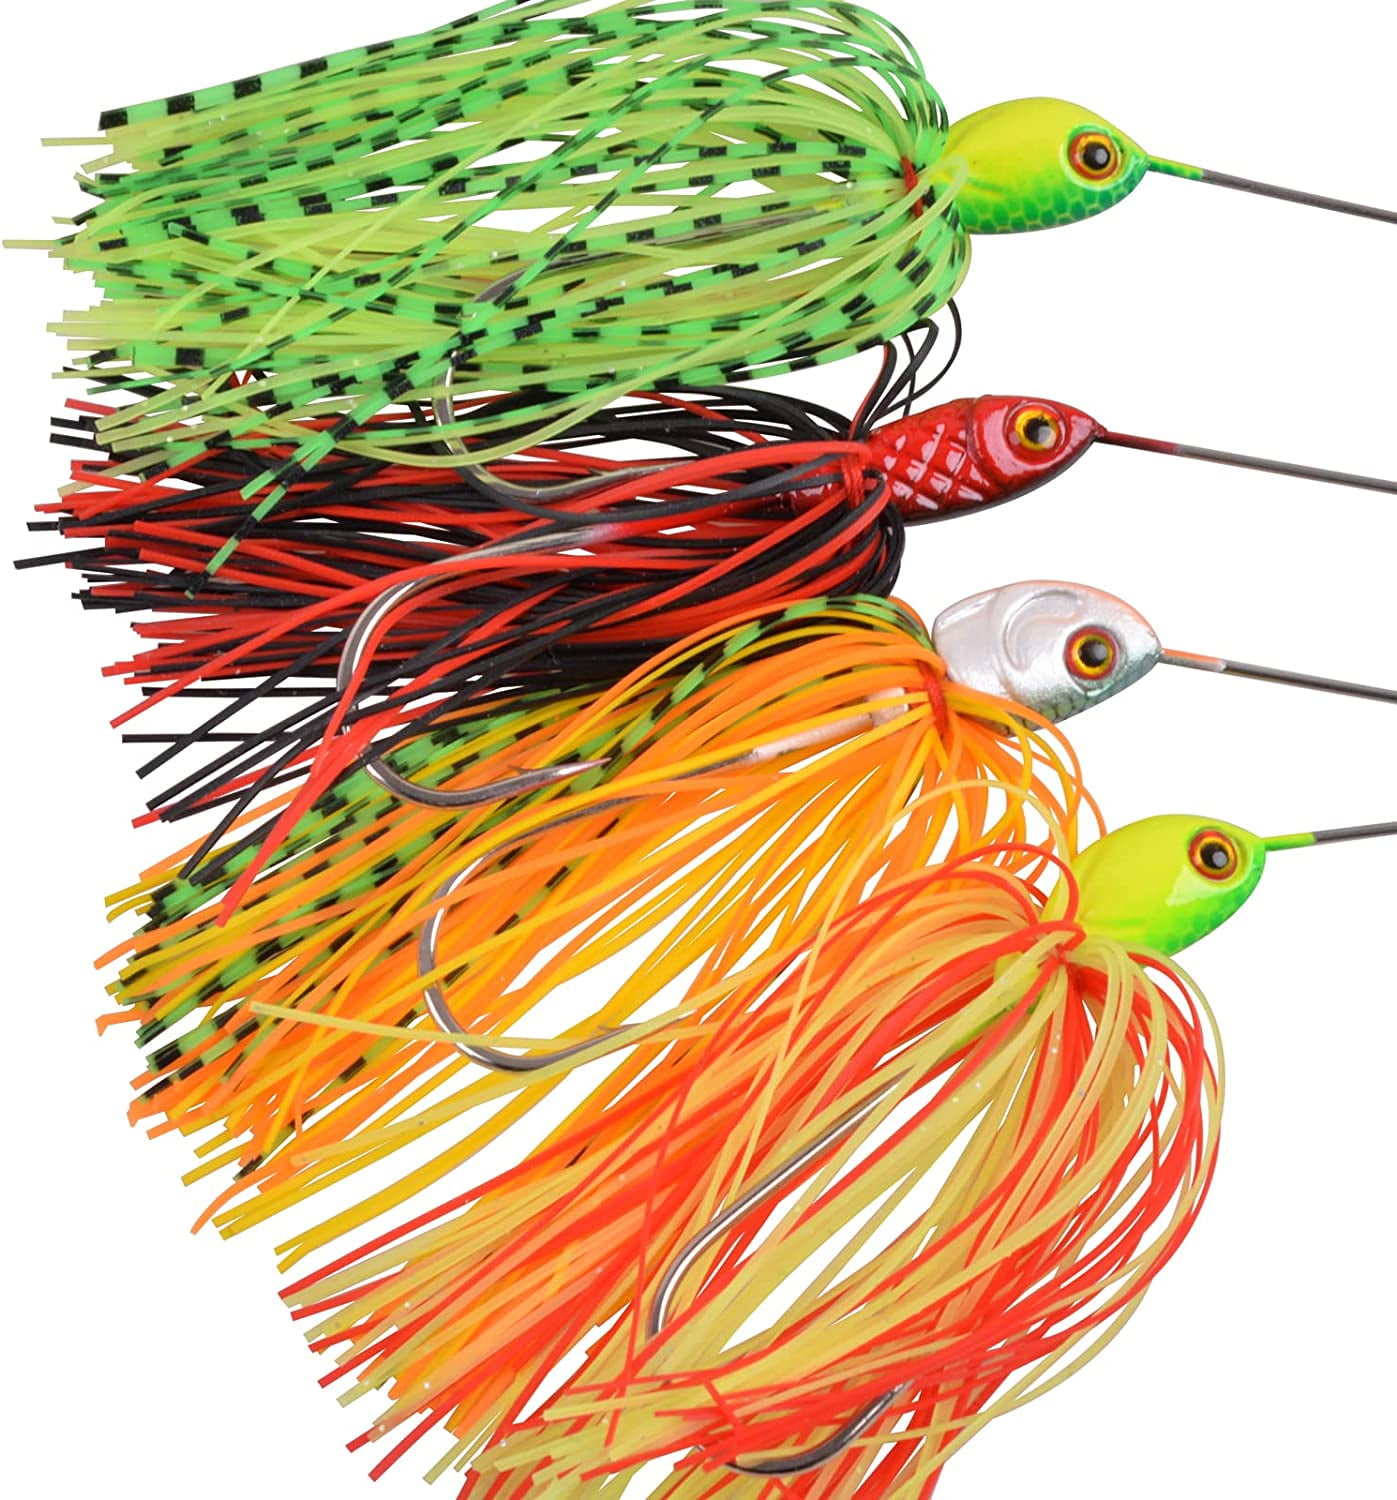 OROOTL Fishing Lures Spinnerbait, Bass Fishing Lure Spinner Baits Kit Hard Metal  Multicolor Buzzbait Spinnerbait Jigs for Bass Pike Trout Salmon 